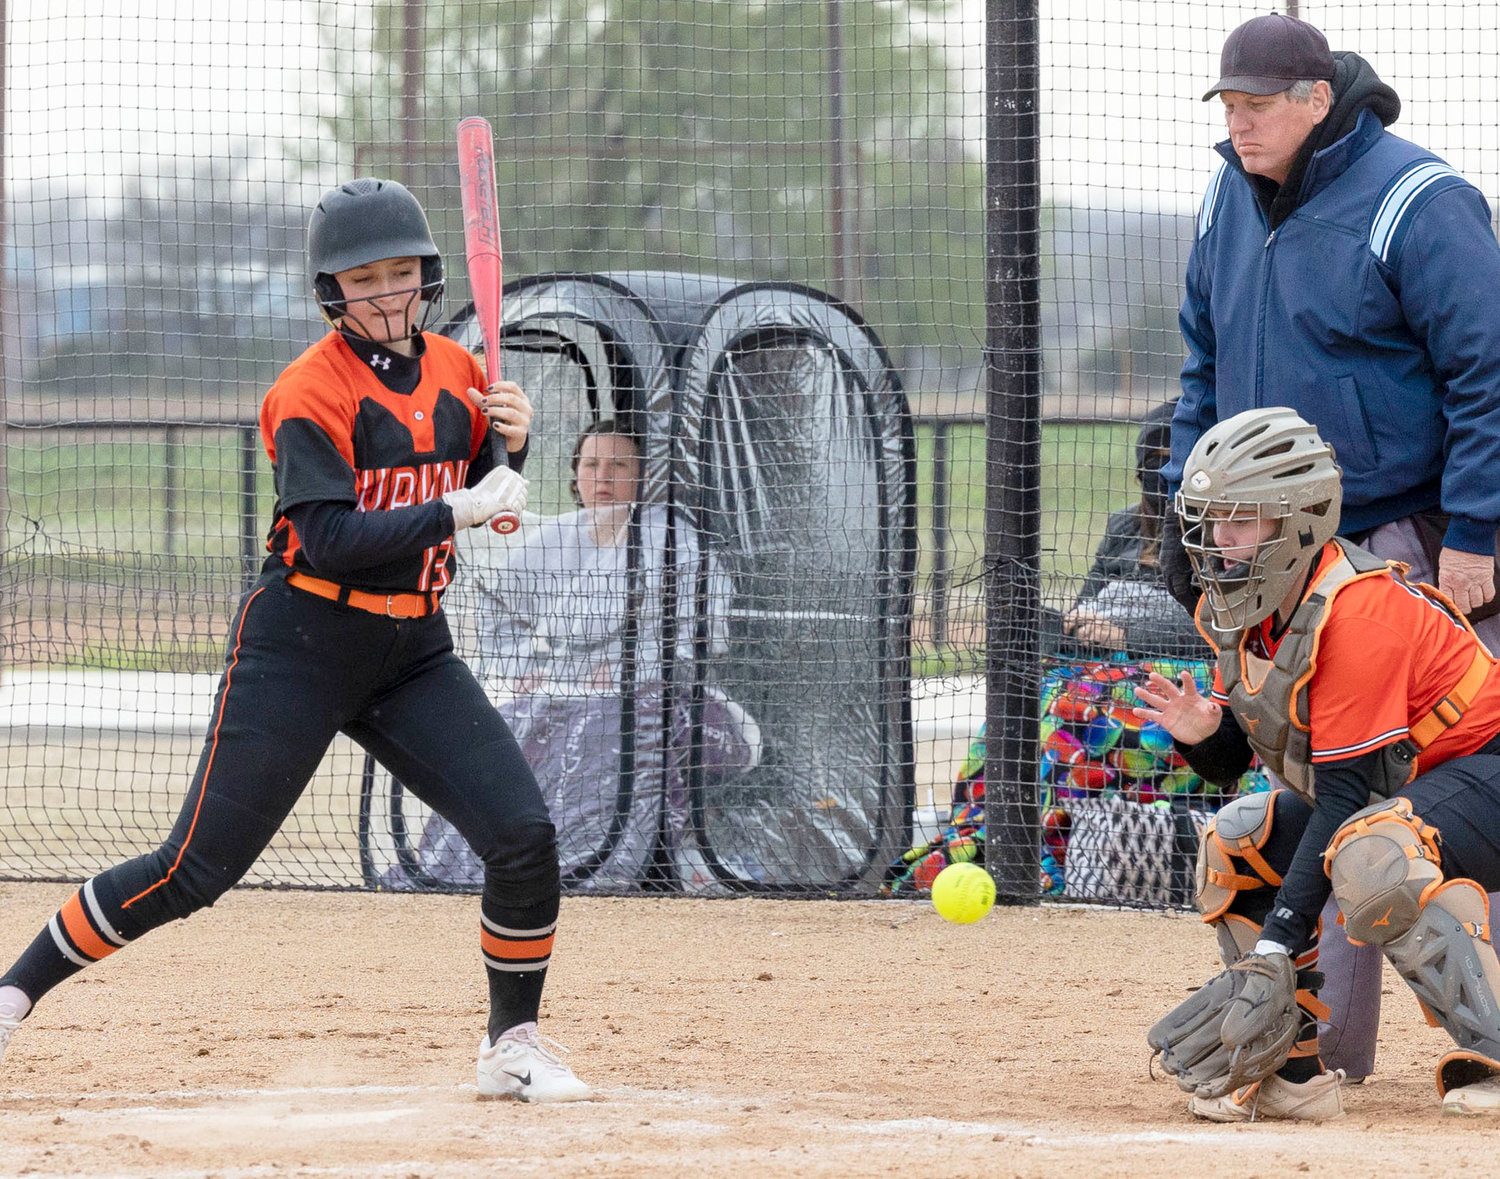 Wayne sophomore Brysten Shephard watches a pitch out of the strike zone during a blustery game Monday. Alex defeated Wayne 16-11.